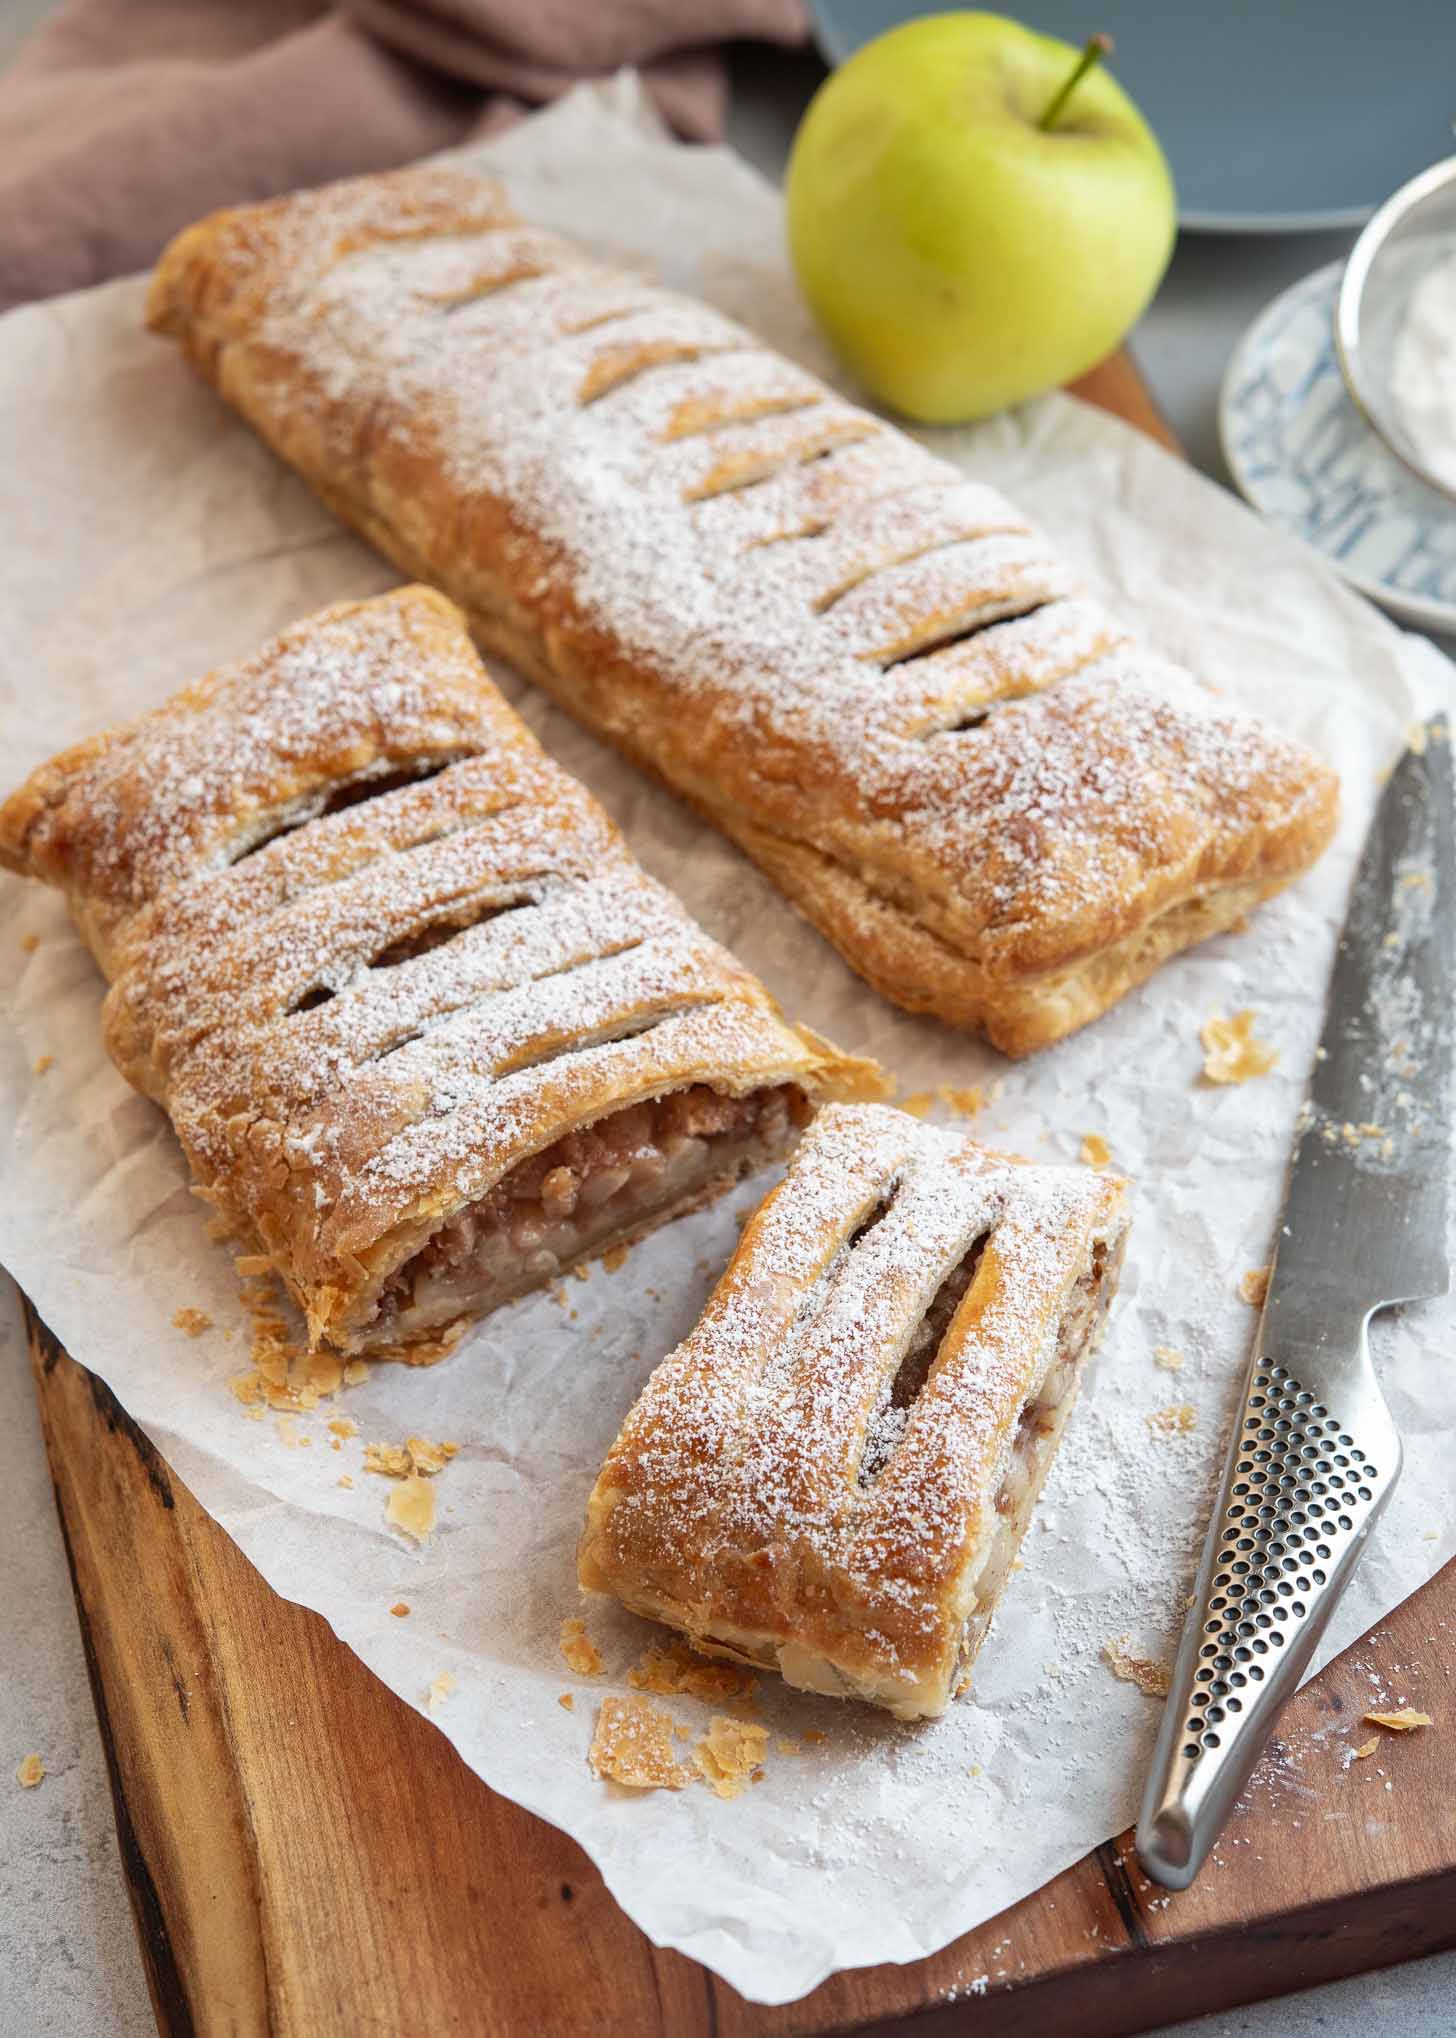 Apple strudel dusted with powdered sugar and sliced.